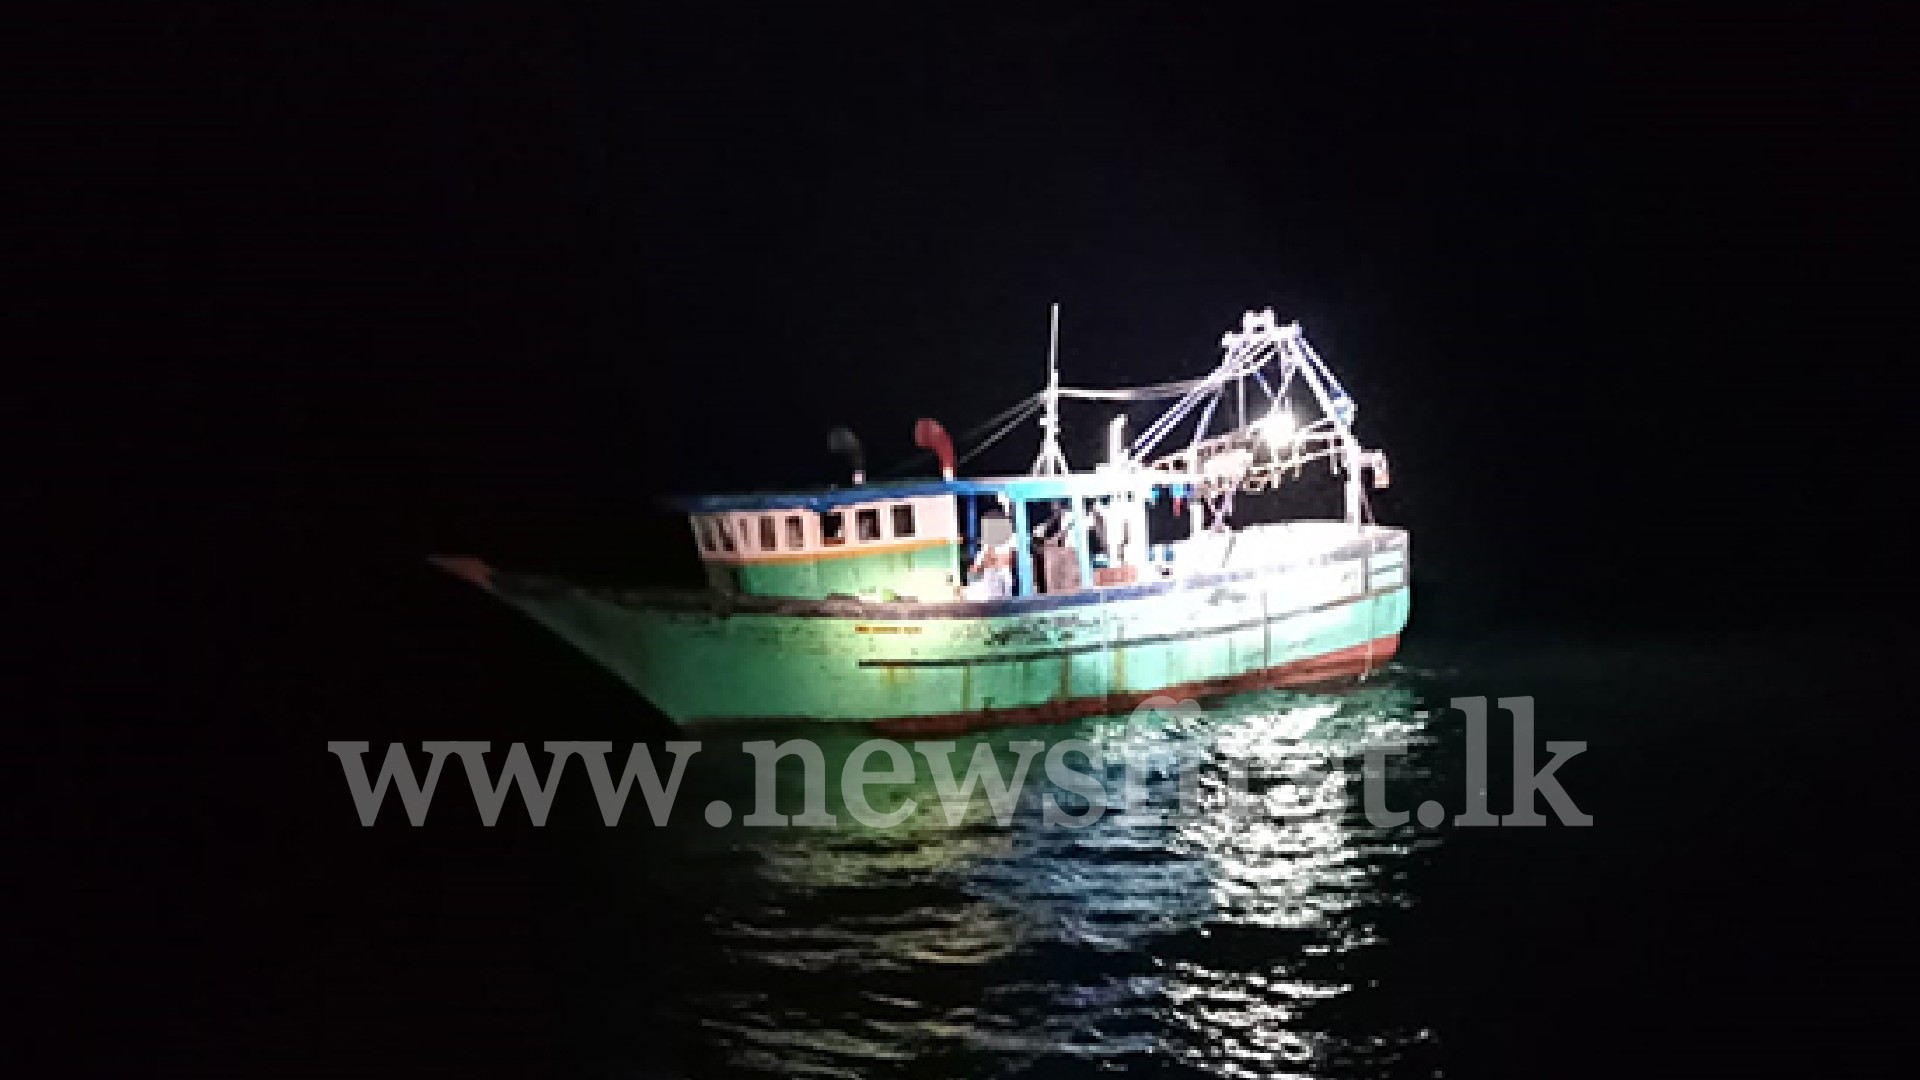 Sufficient fuel for the fishing community – Ministry